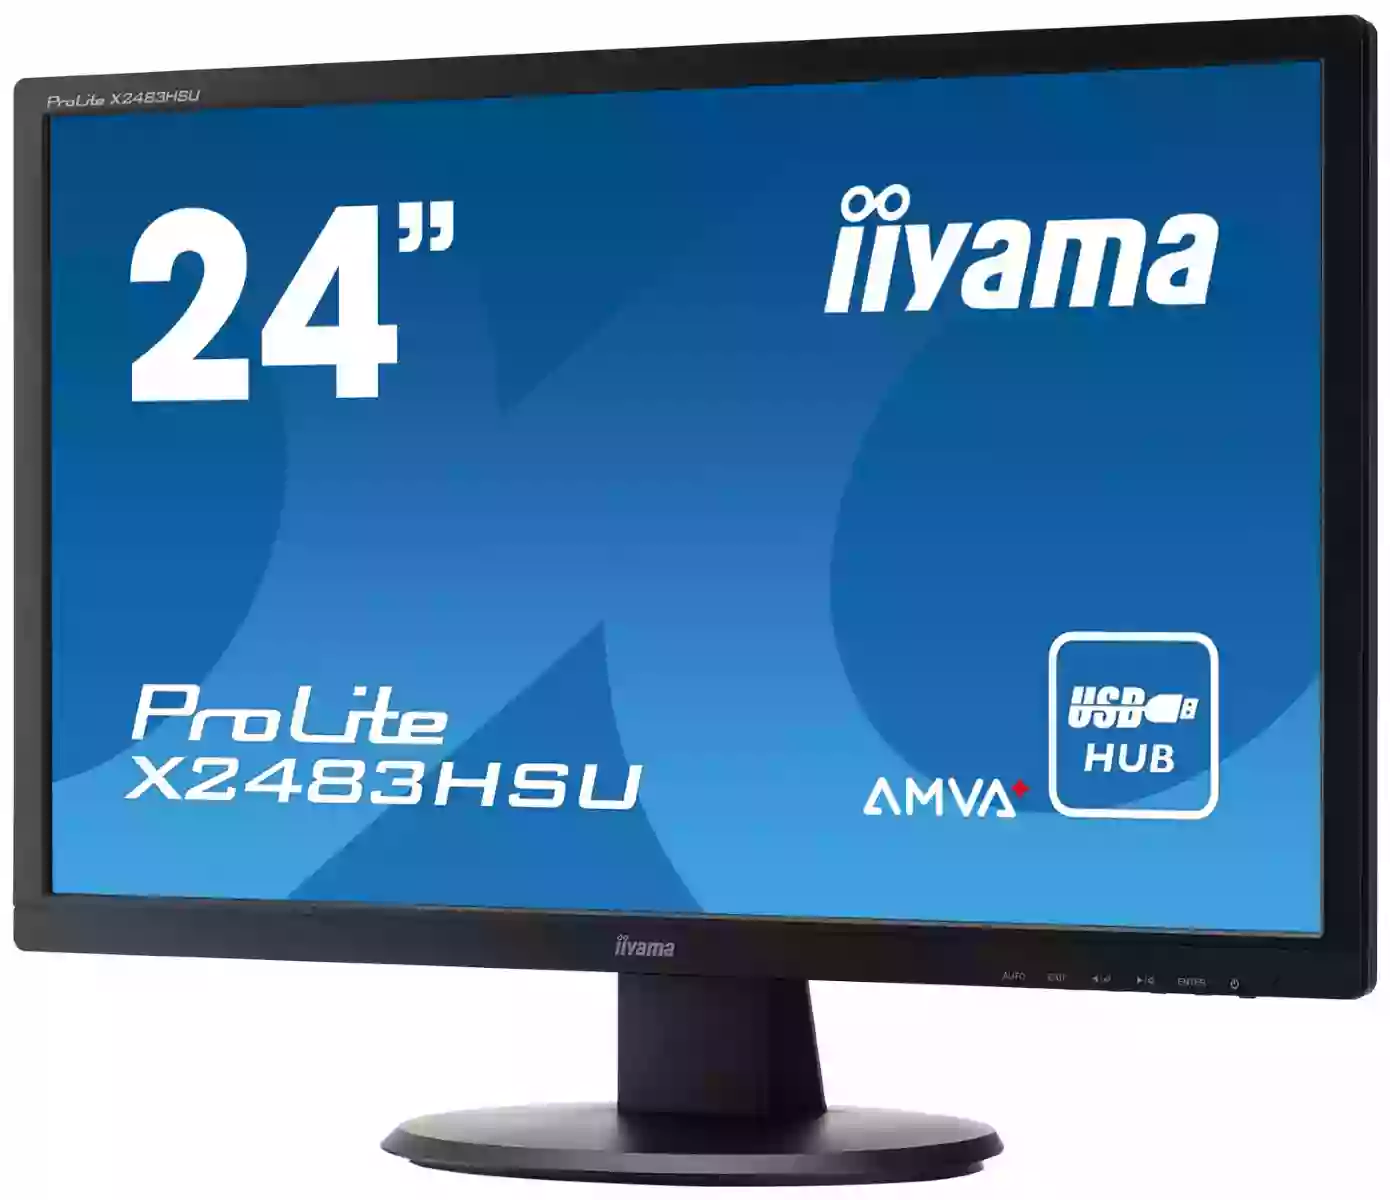 24 inch refurbished full HD 1080p tft Monitor with HDMI